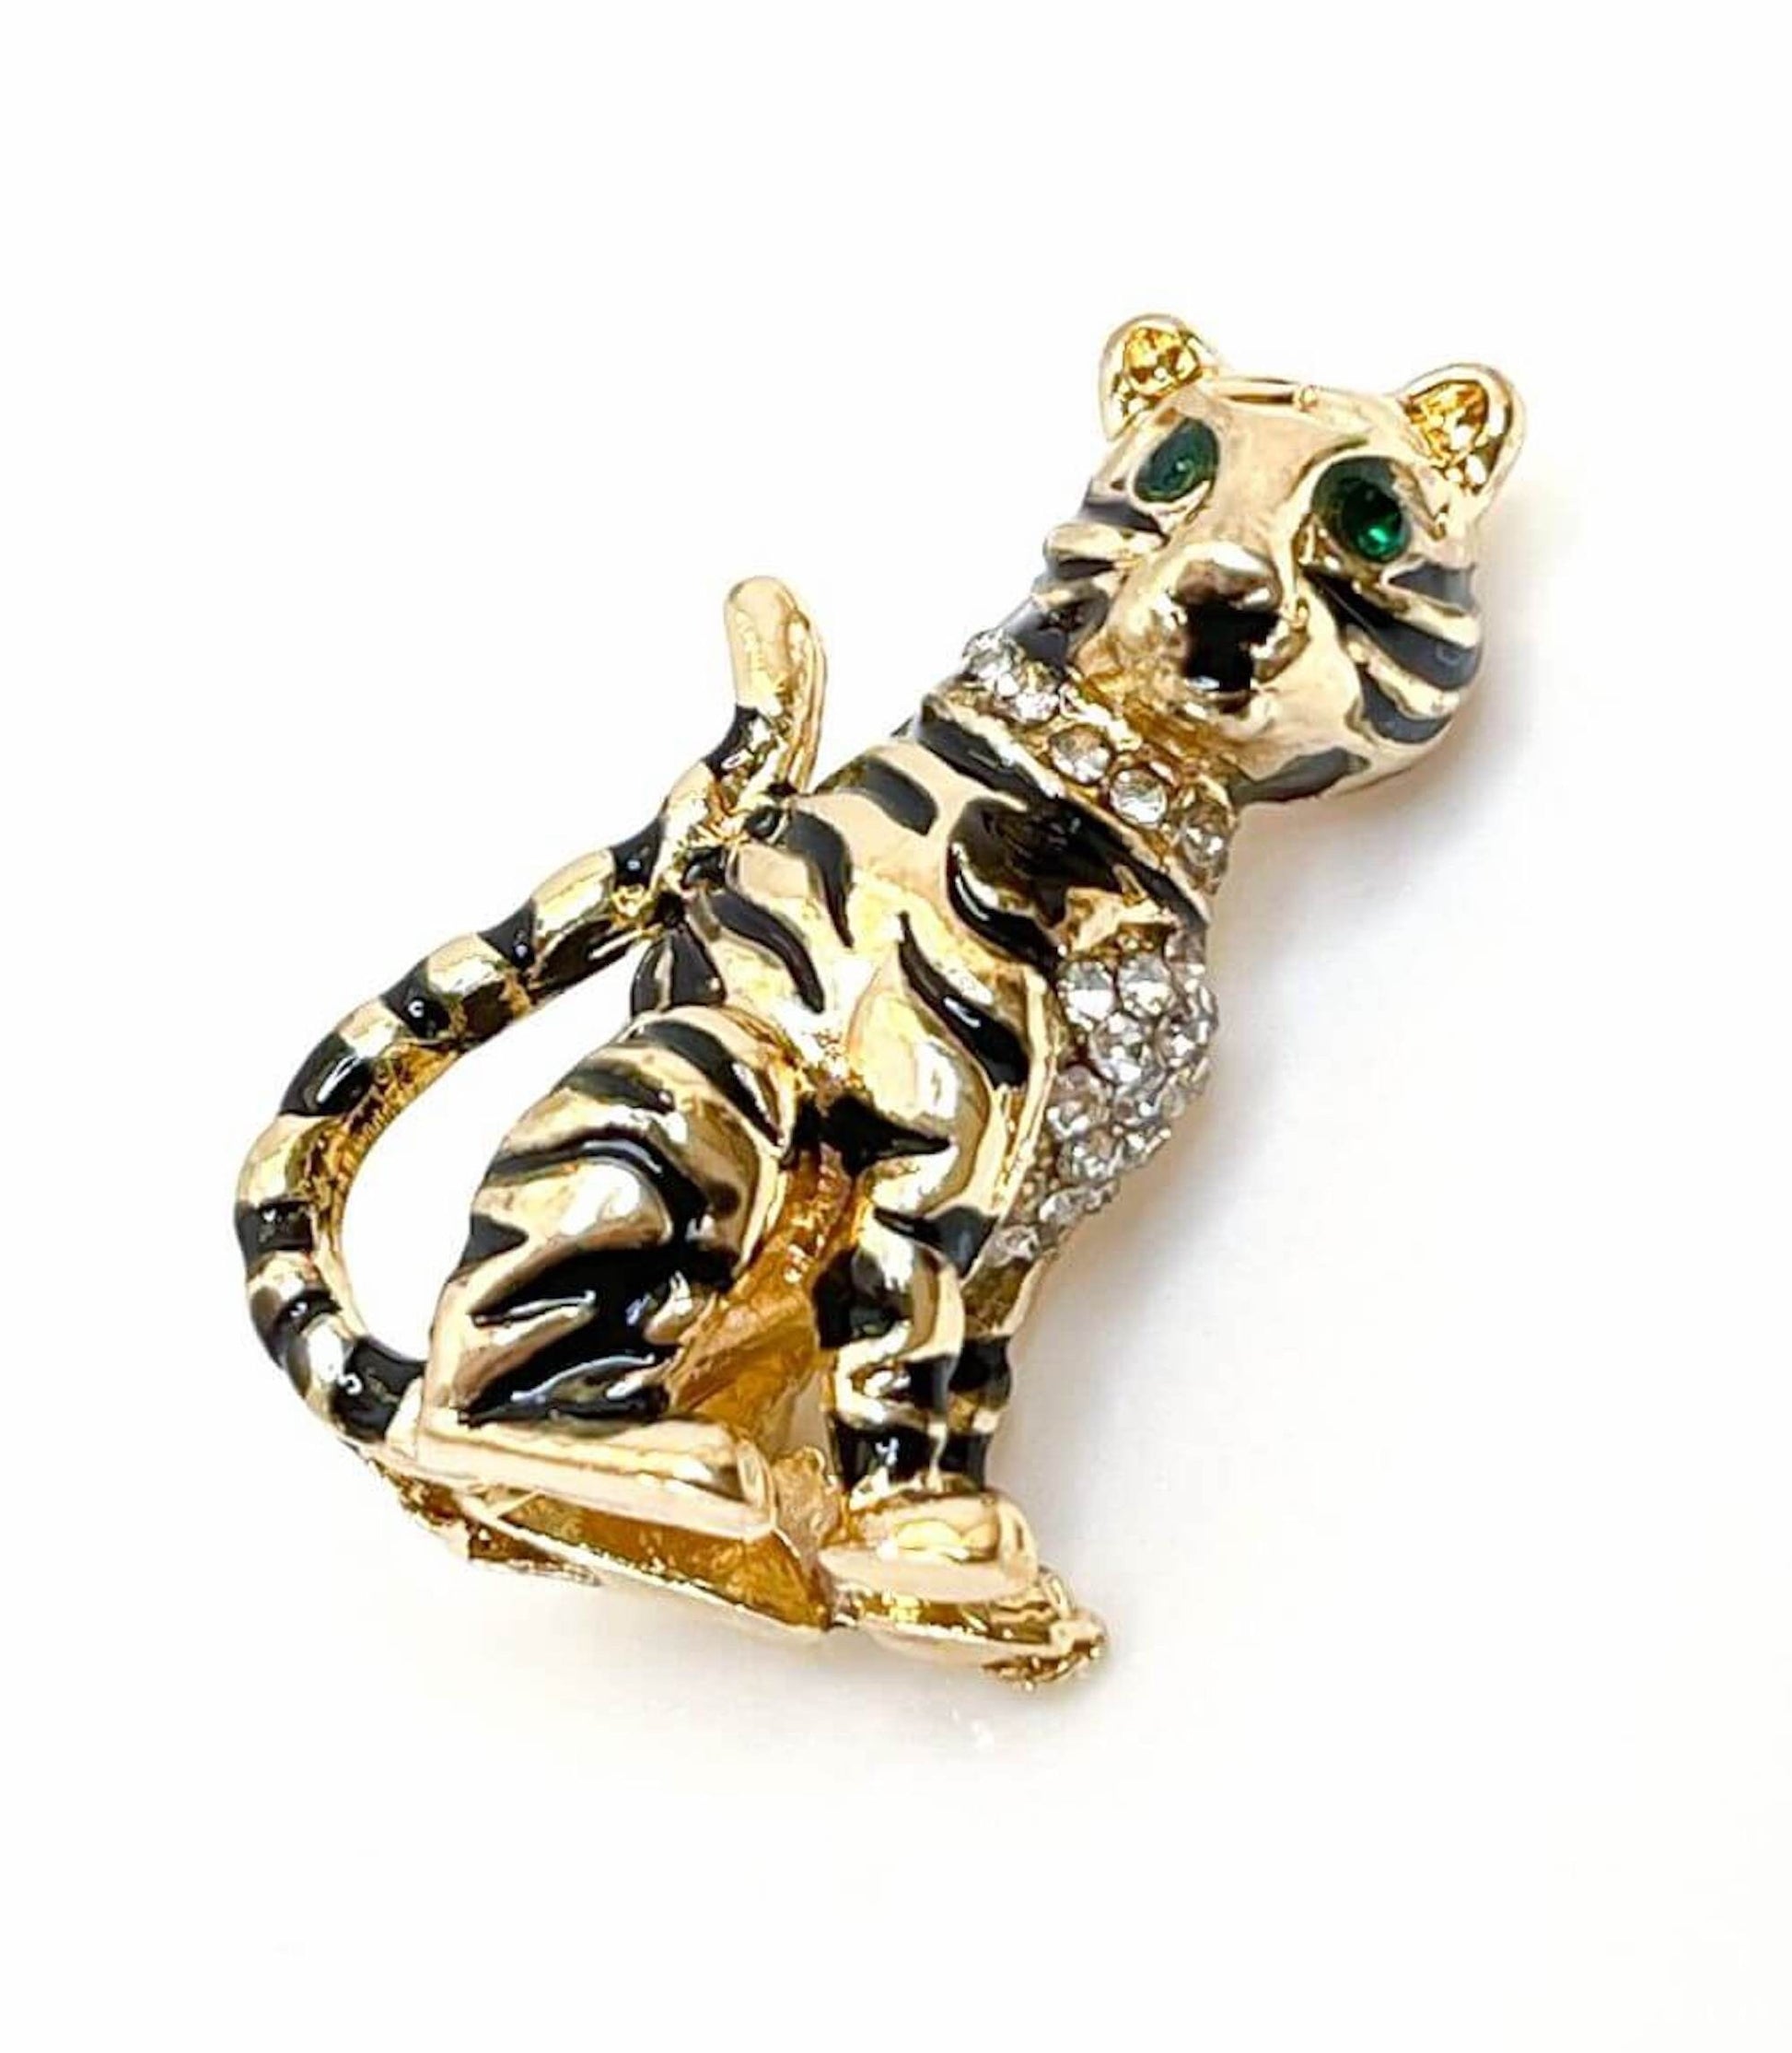 Gold Sitting Tiger Brooch, Gift for Animal Lovers, Tiger with Black Strips Jewelry, Brooches For Women